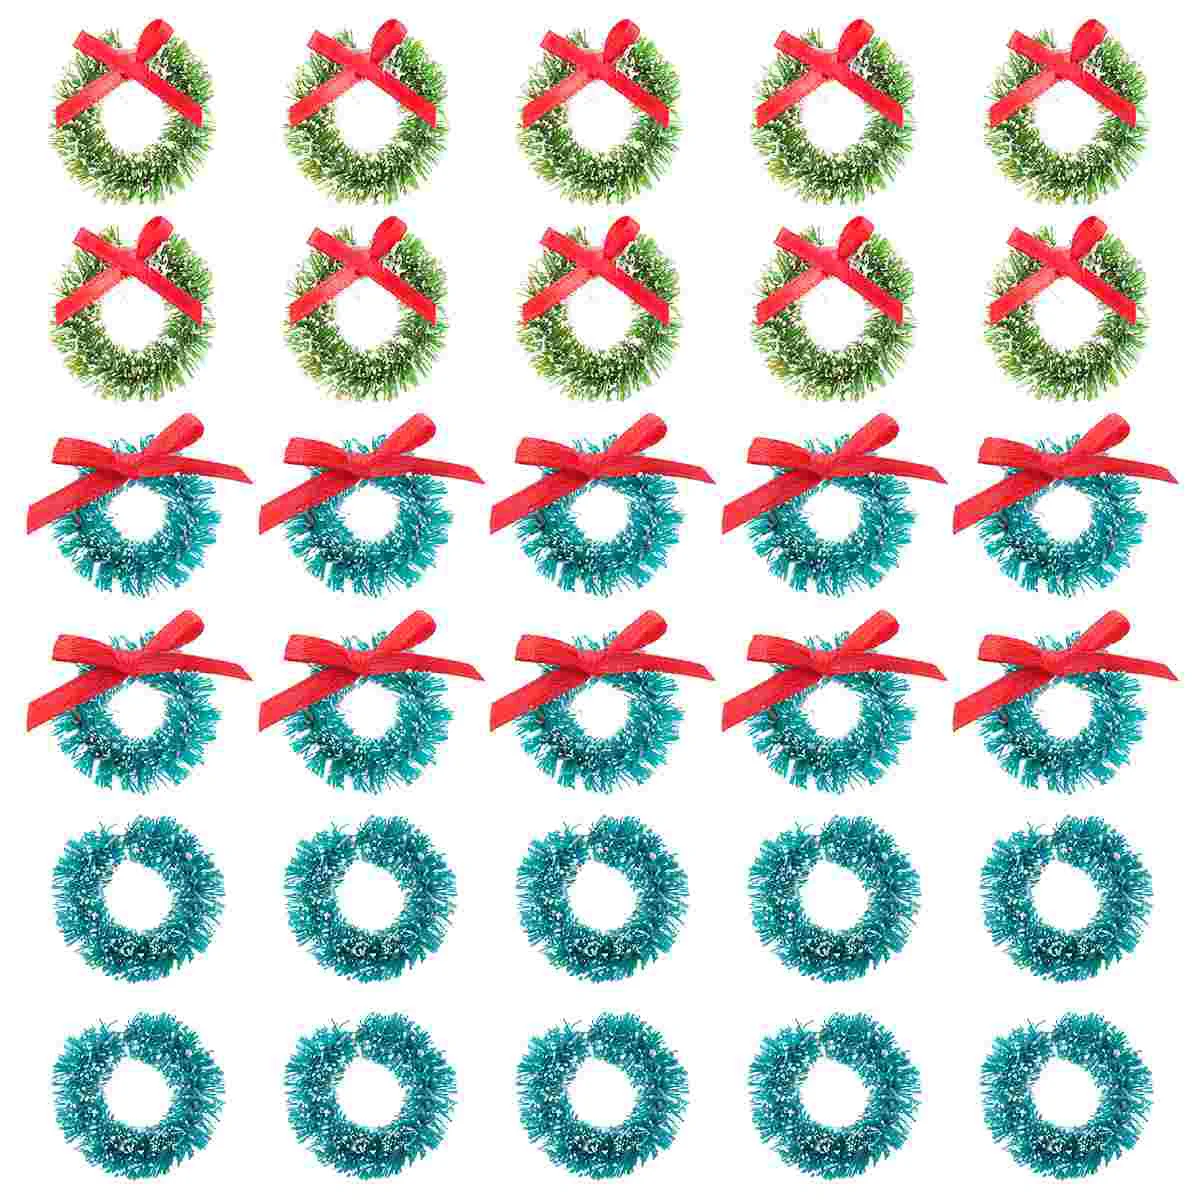 

Wreath Christmas Mini Wreaths Xmas Miniature Tree Crafts Artificial Smallhanging Garland Rings Ornament Holiday